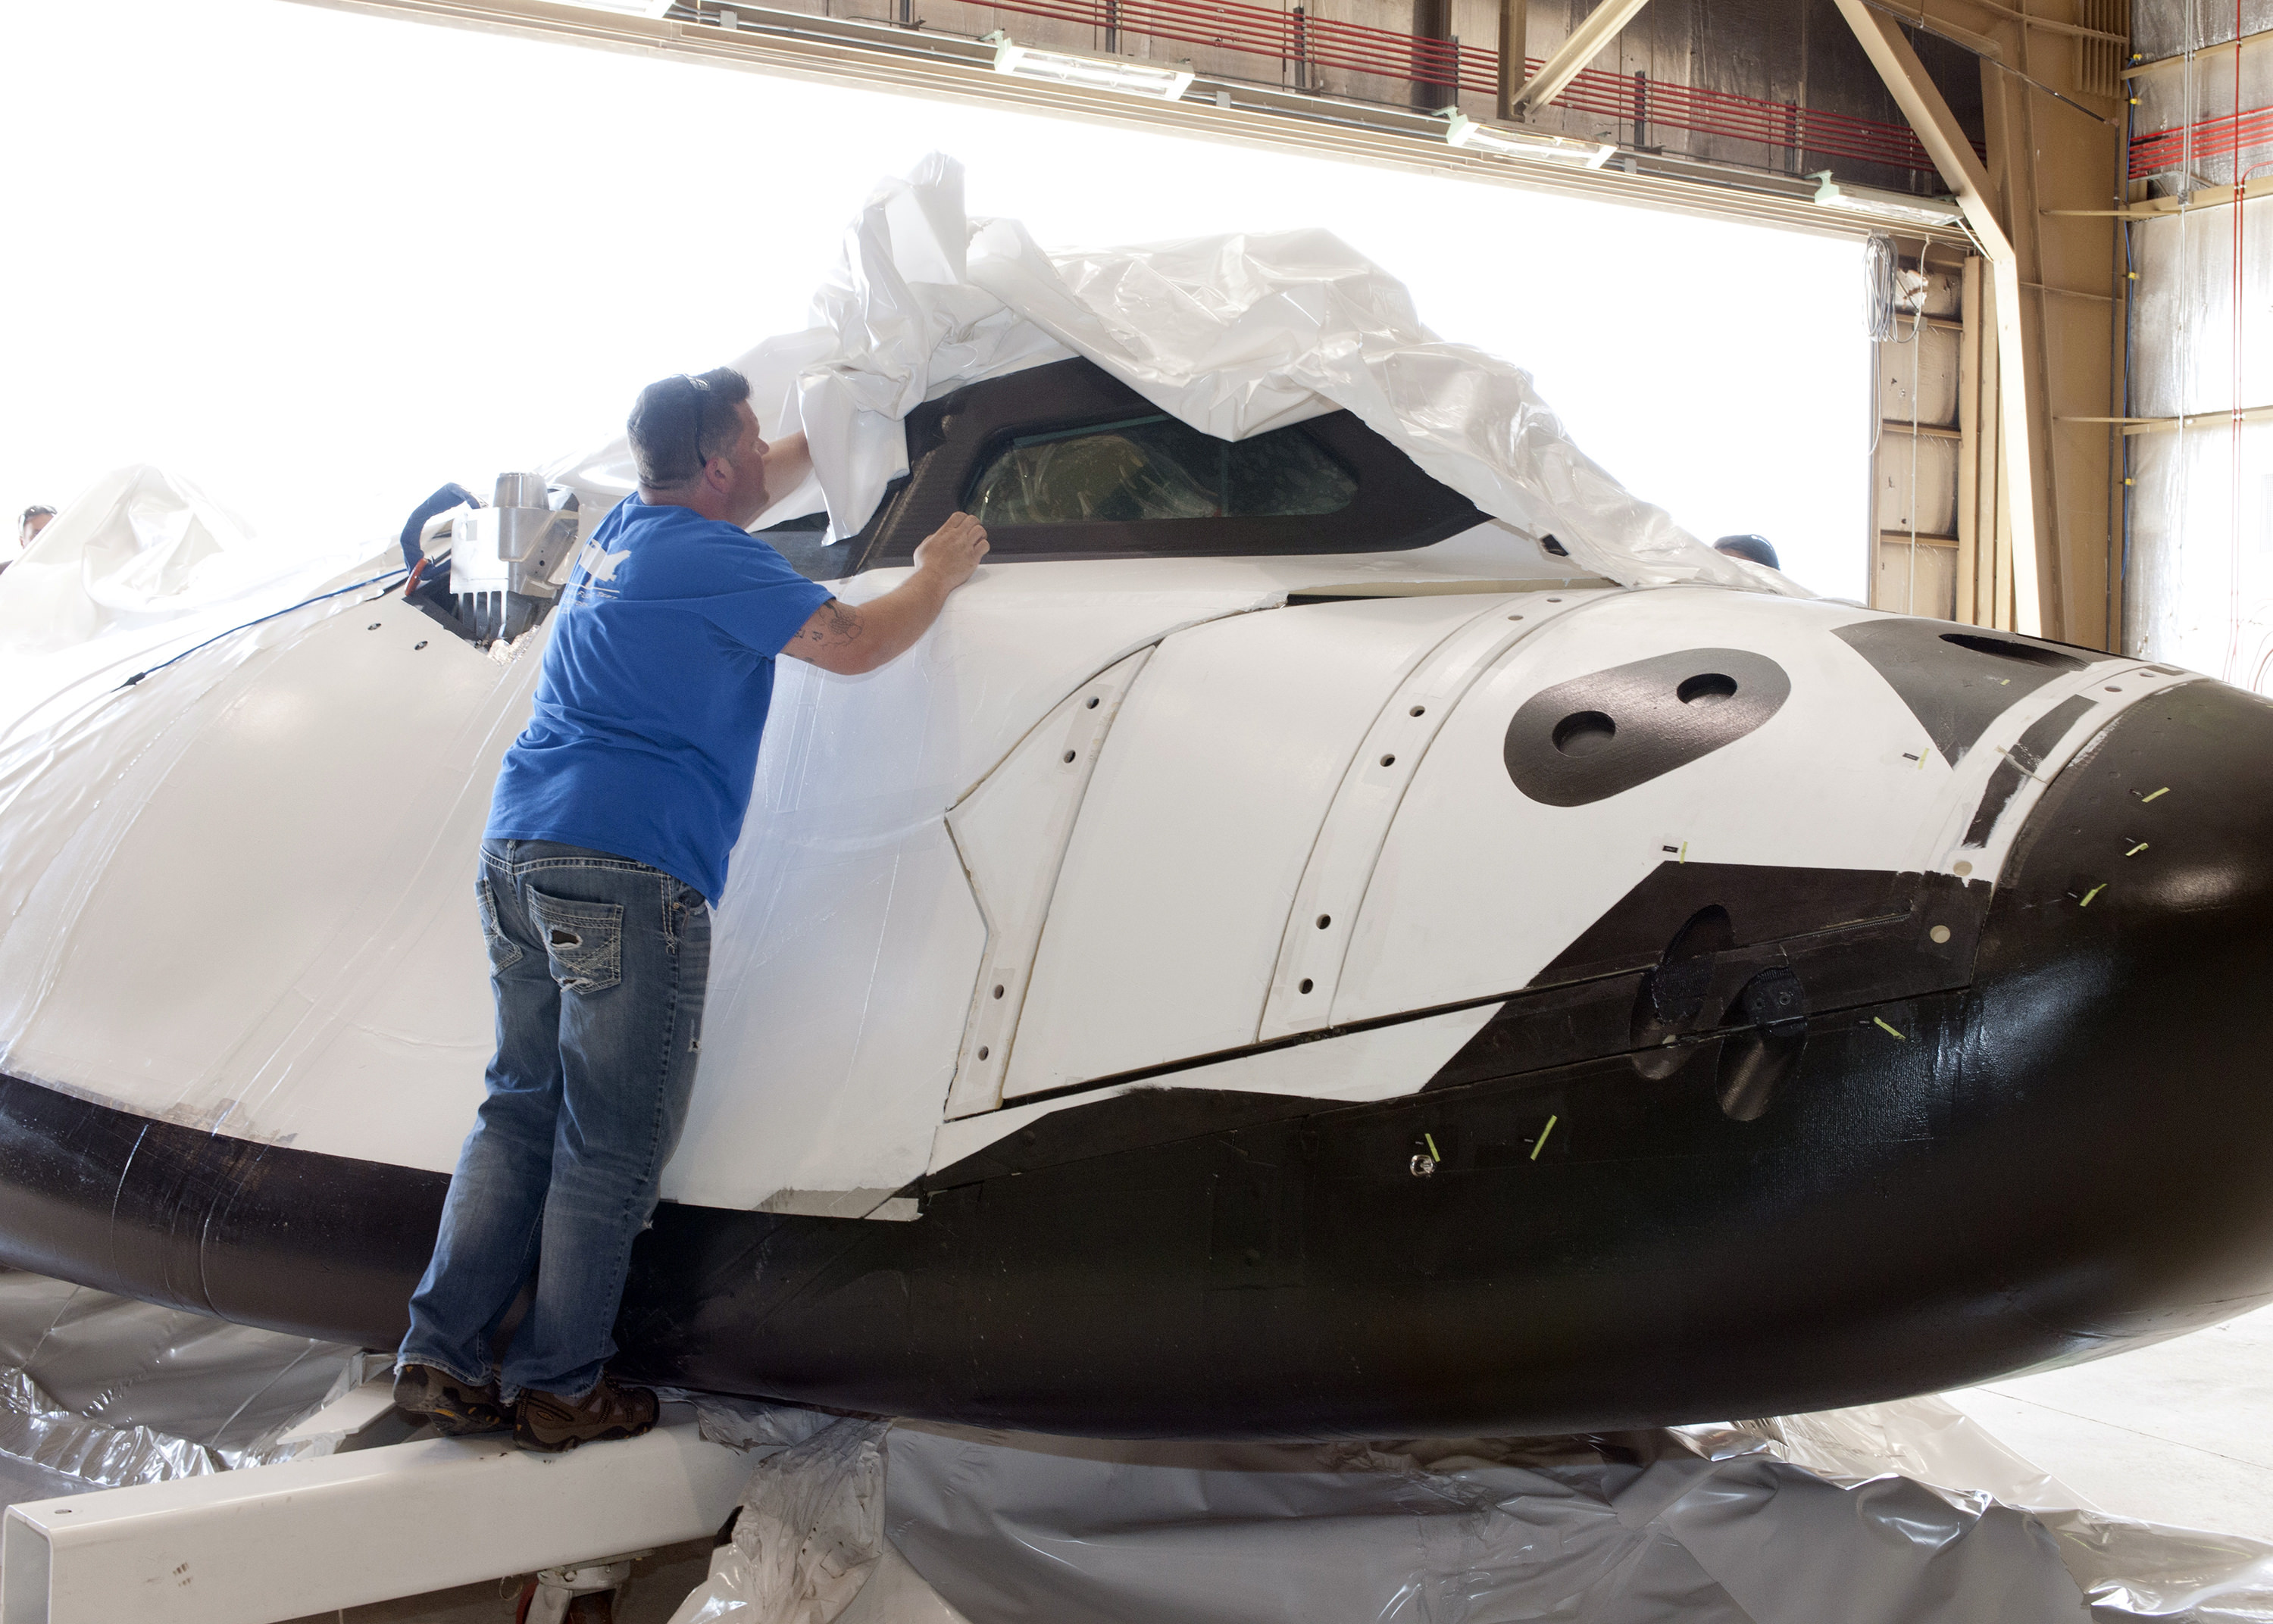 Dream Chaser Readies, Gets Set For Flight Testing - Universe Today